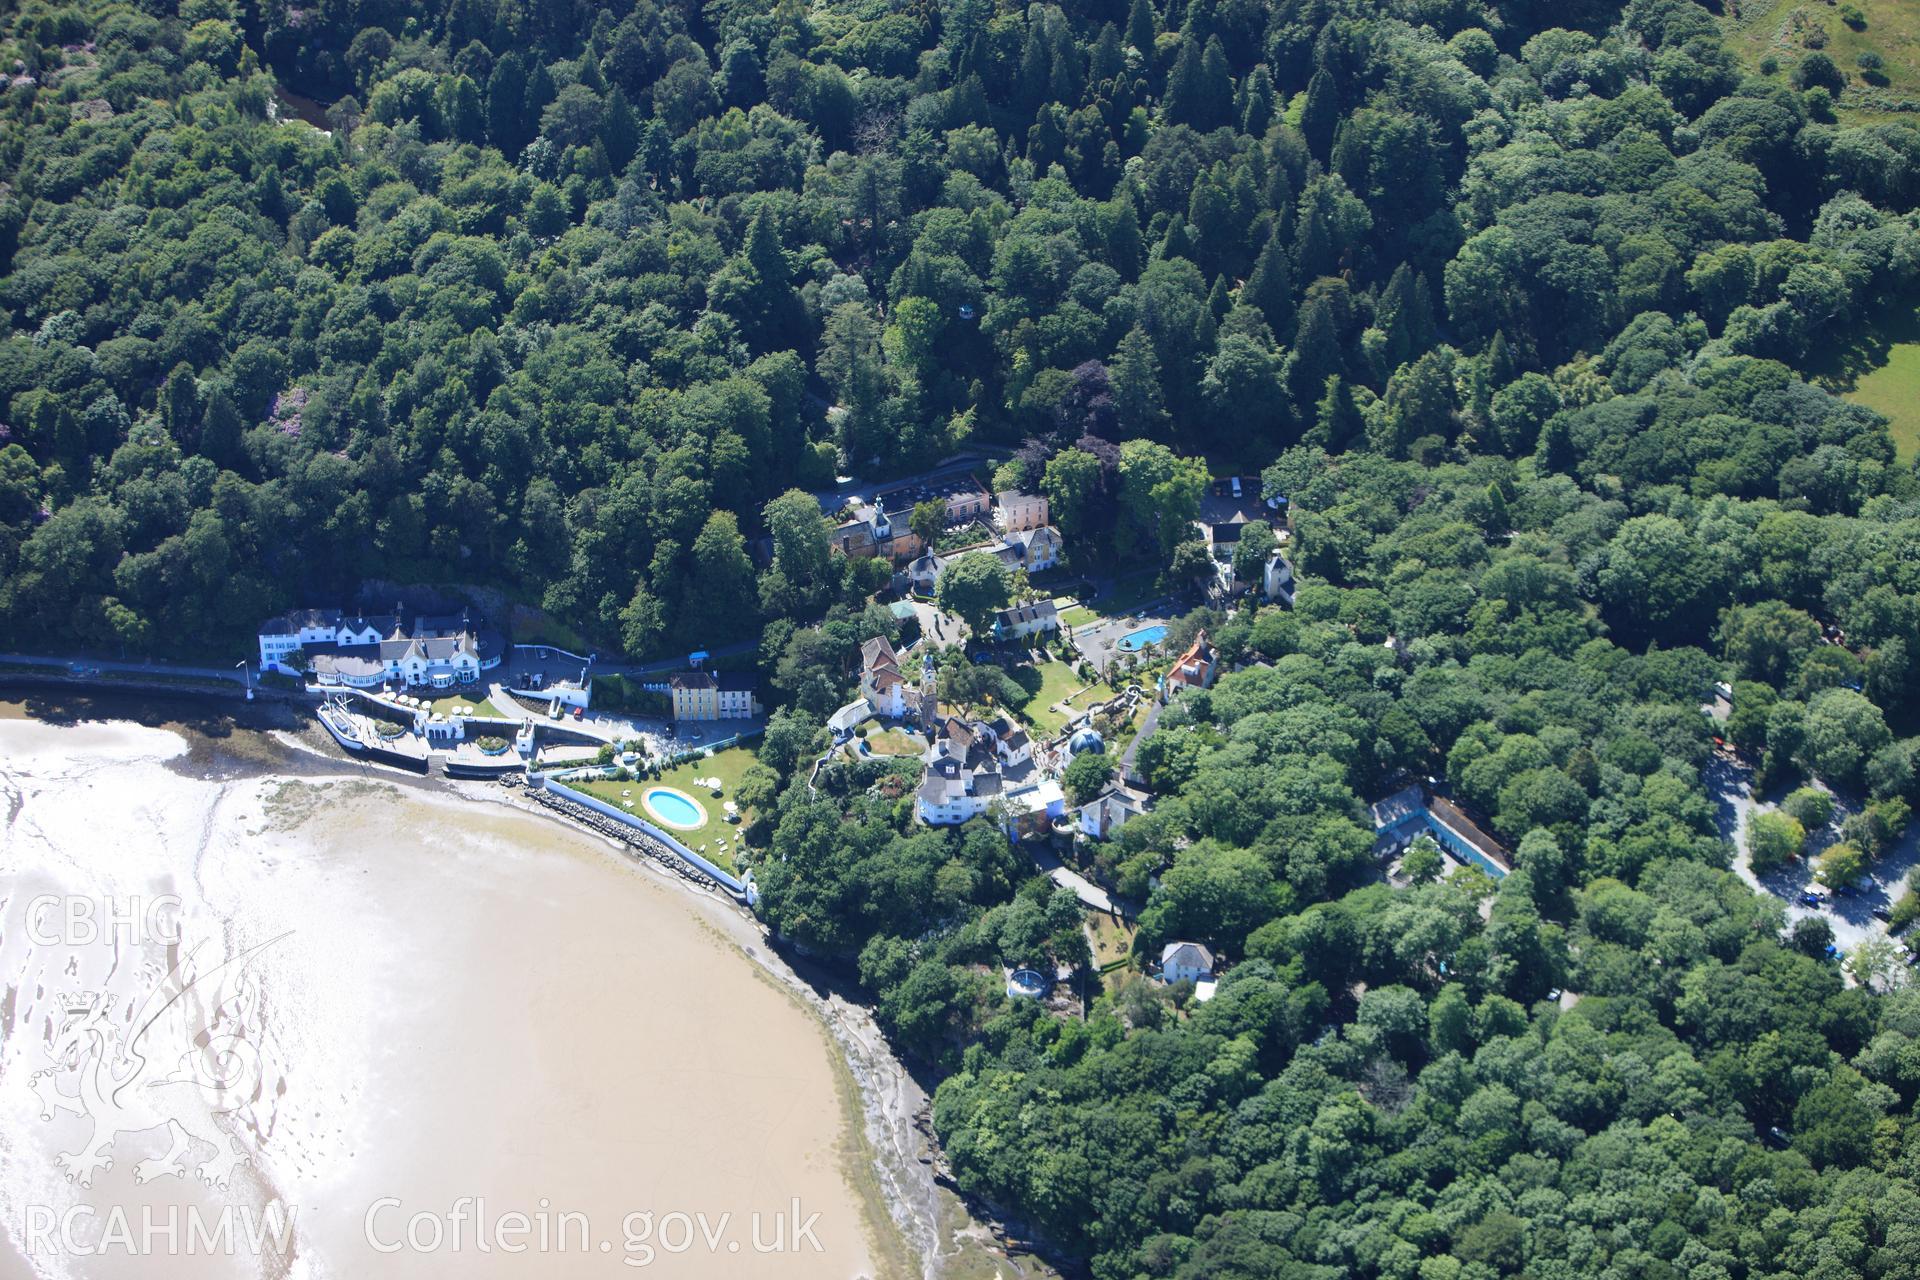 RCAHMW colour oblique photograph of Portmeirion. Taken by Toby Driver on 16/06/2010.